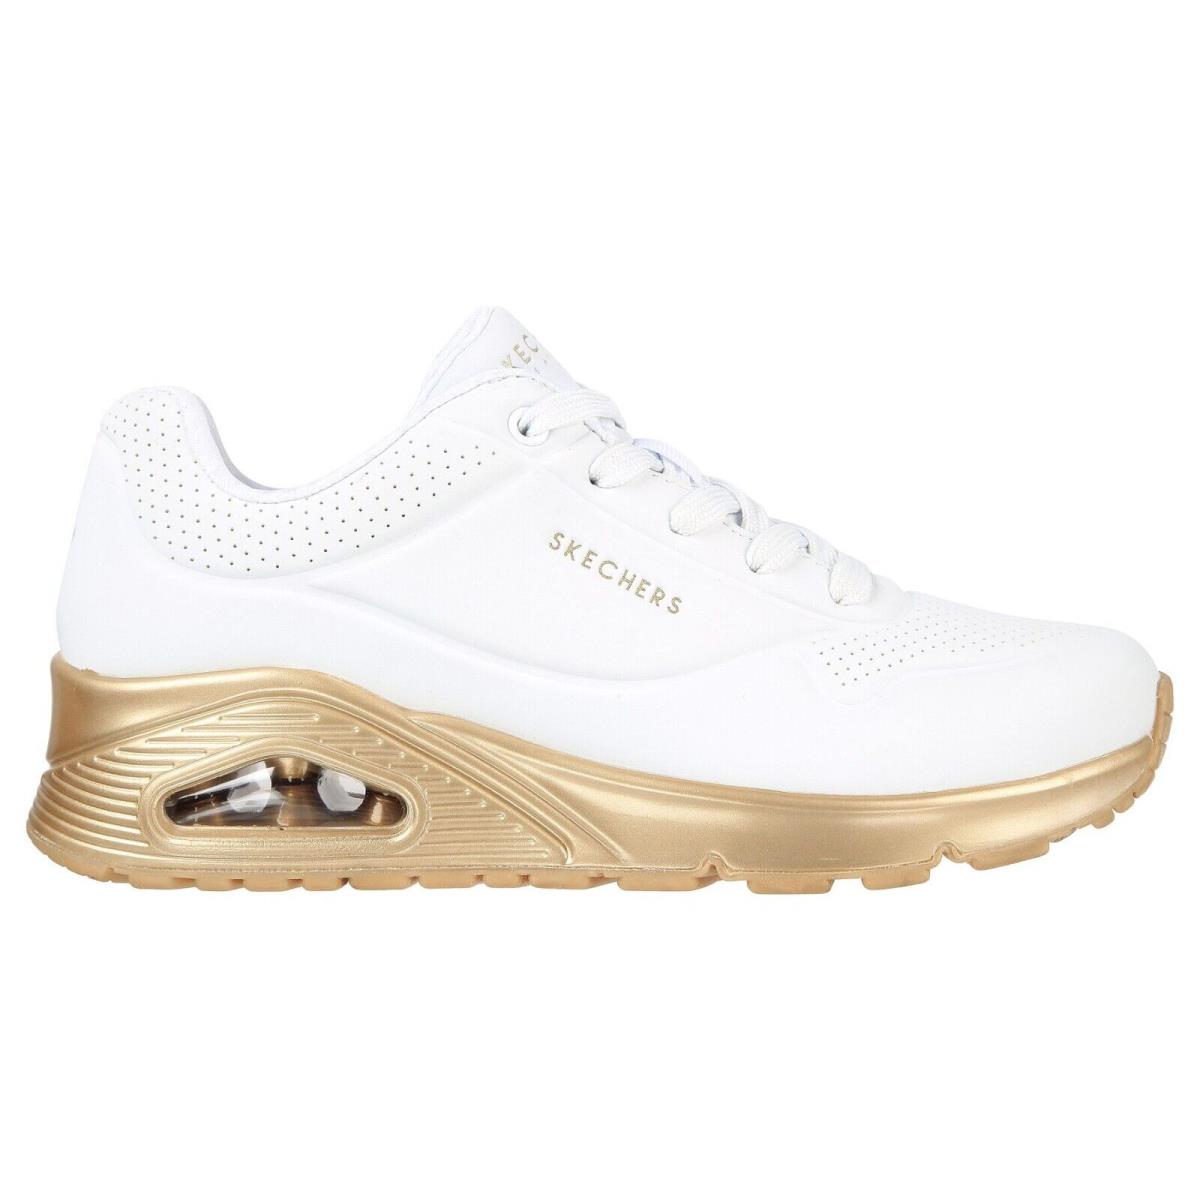 Skechers shoes Uno Gold Soul - White/Gold 10